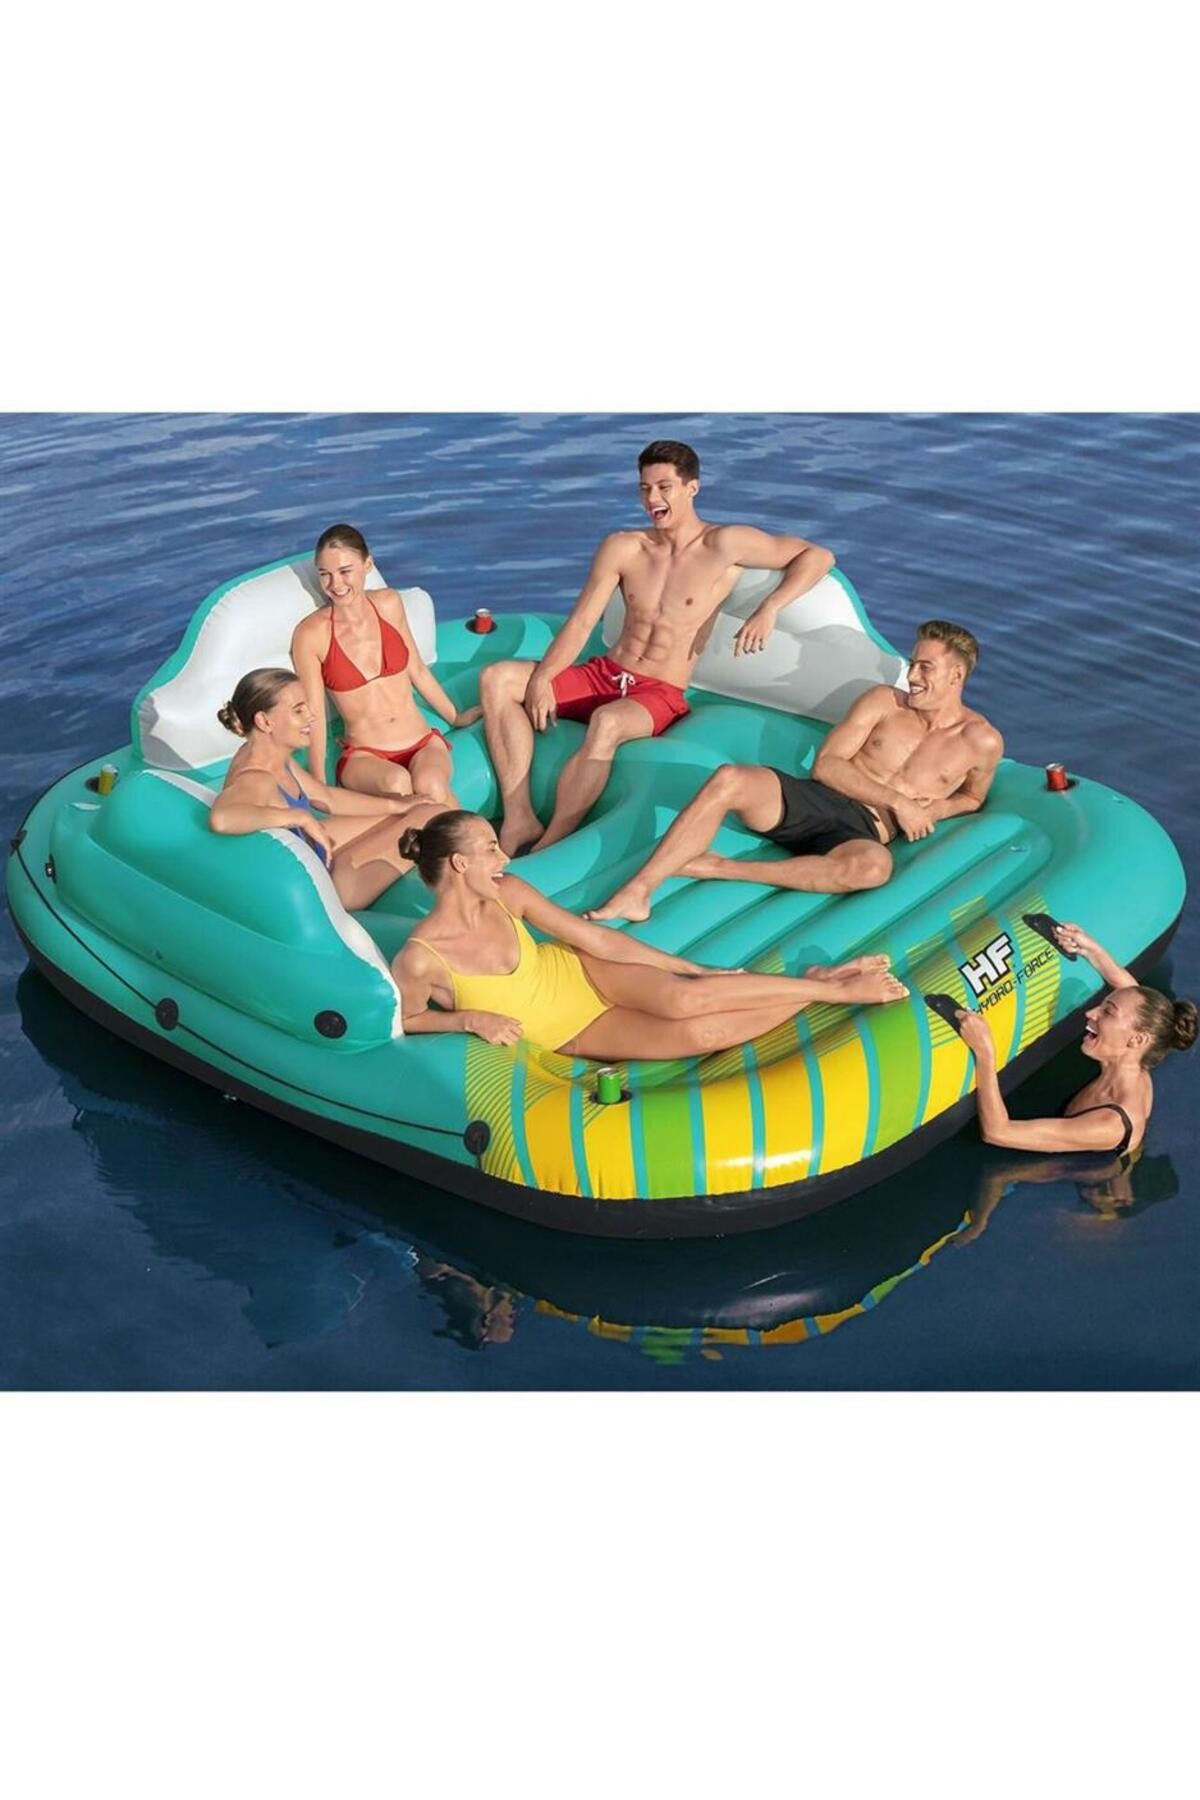 Hydro Force island with sunshade for 5 people